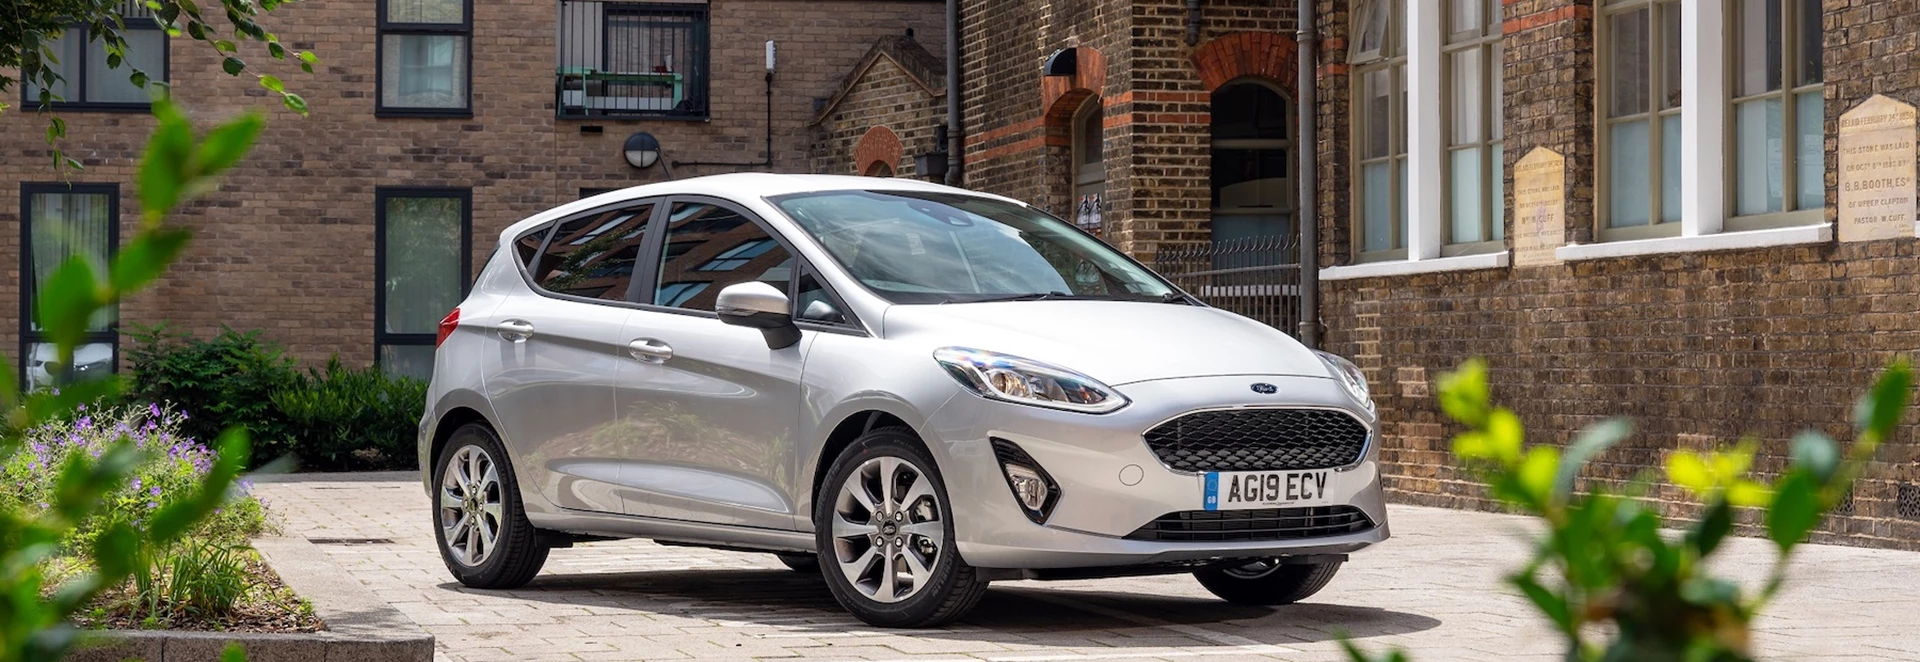 Buyer's guide to the 2021 Ford Fiesta - Car Keys